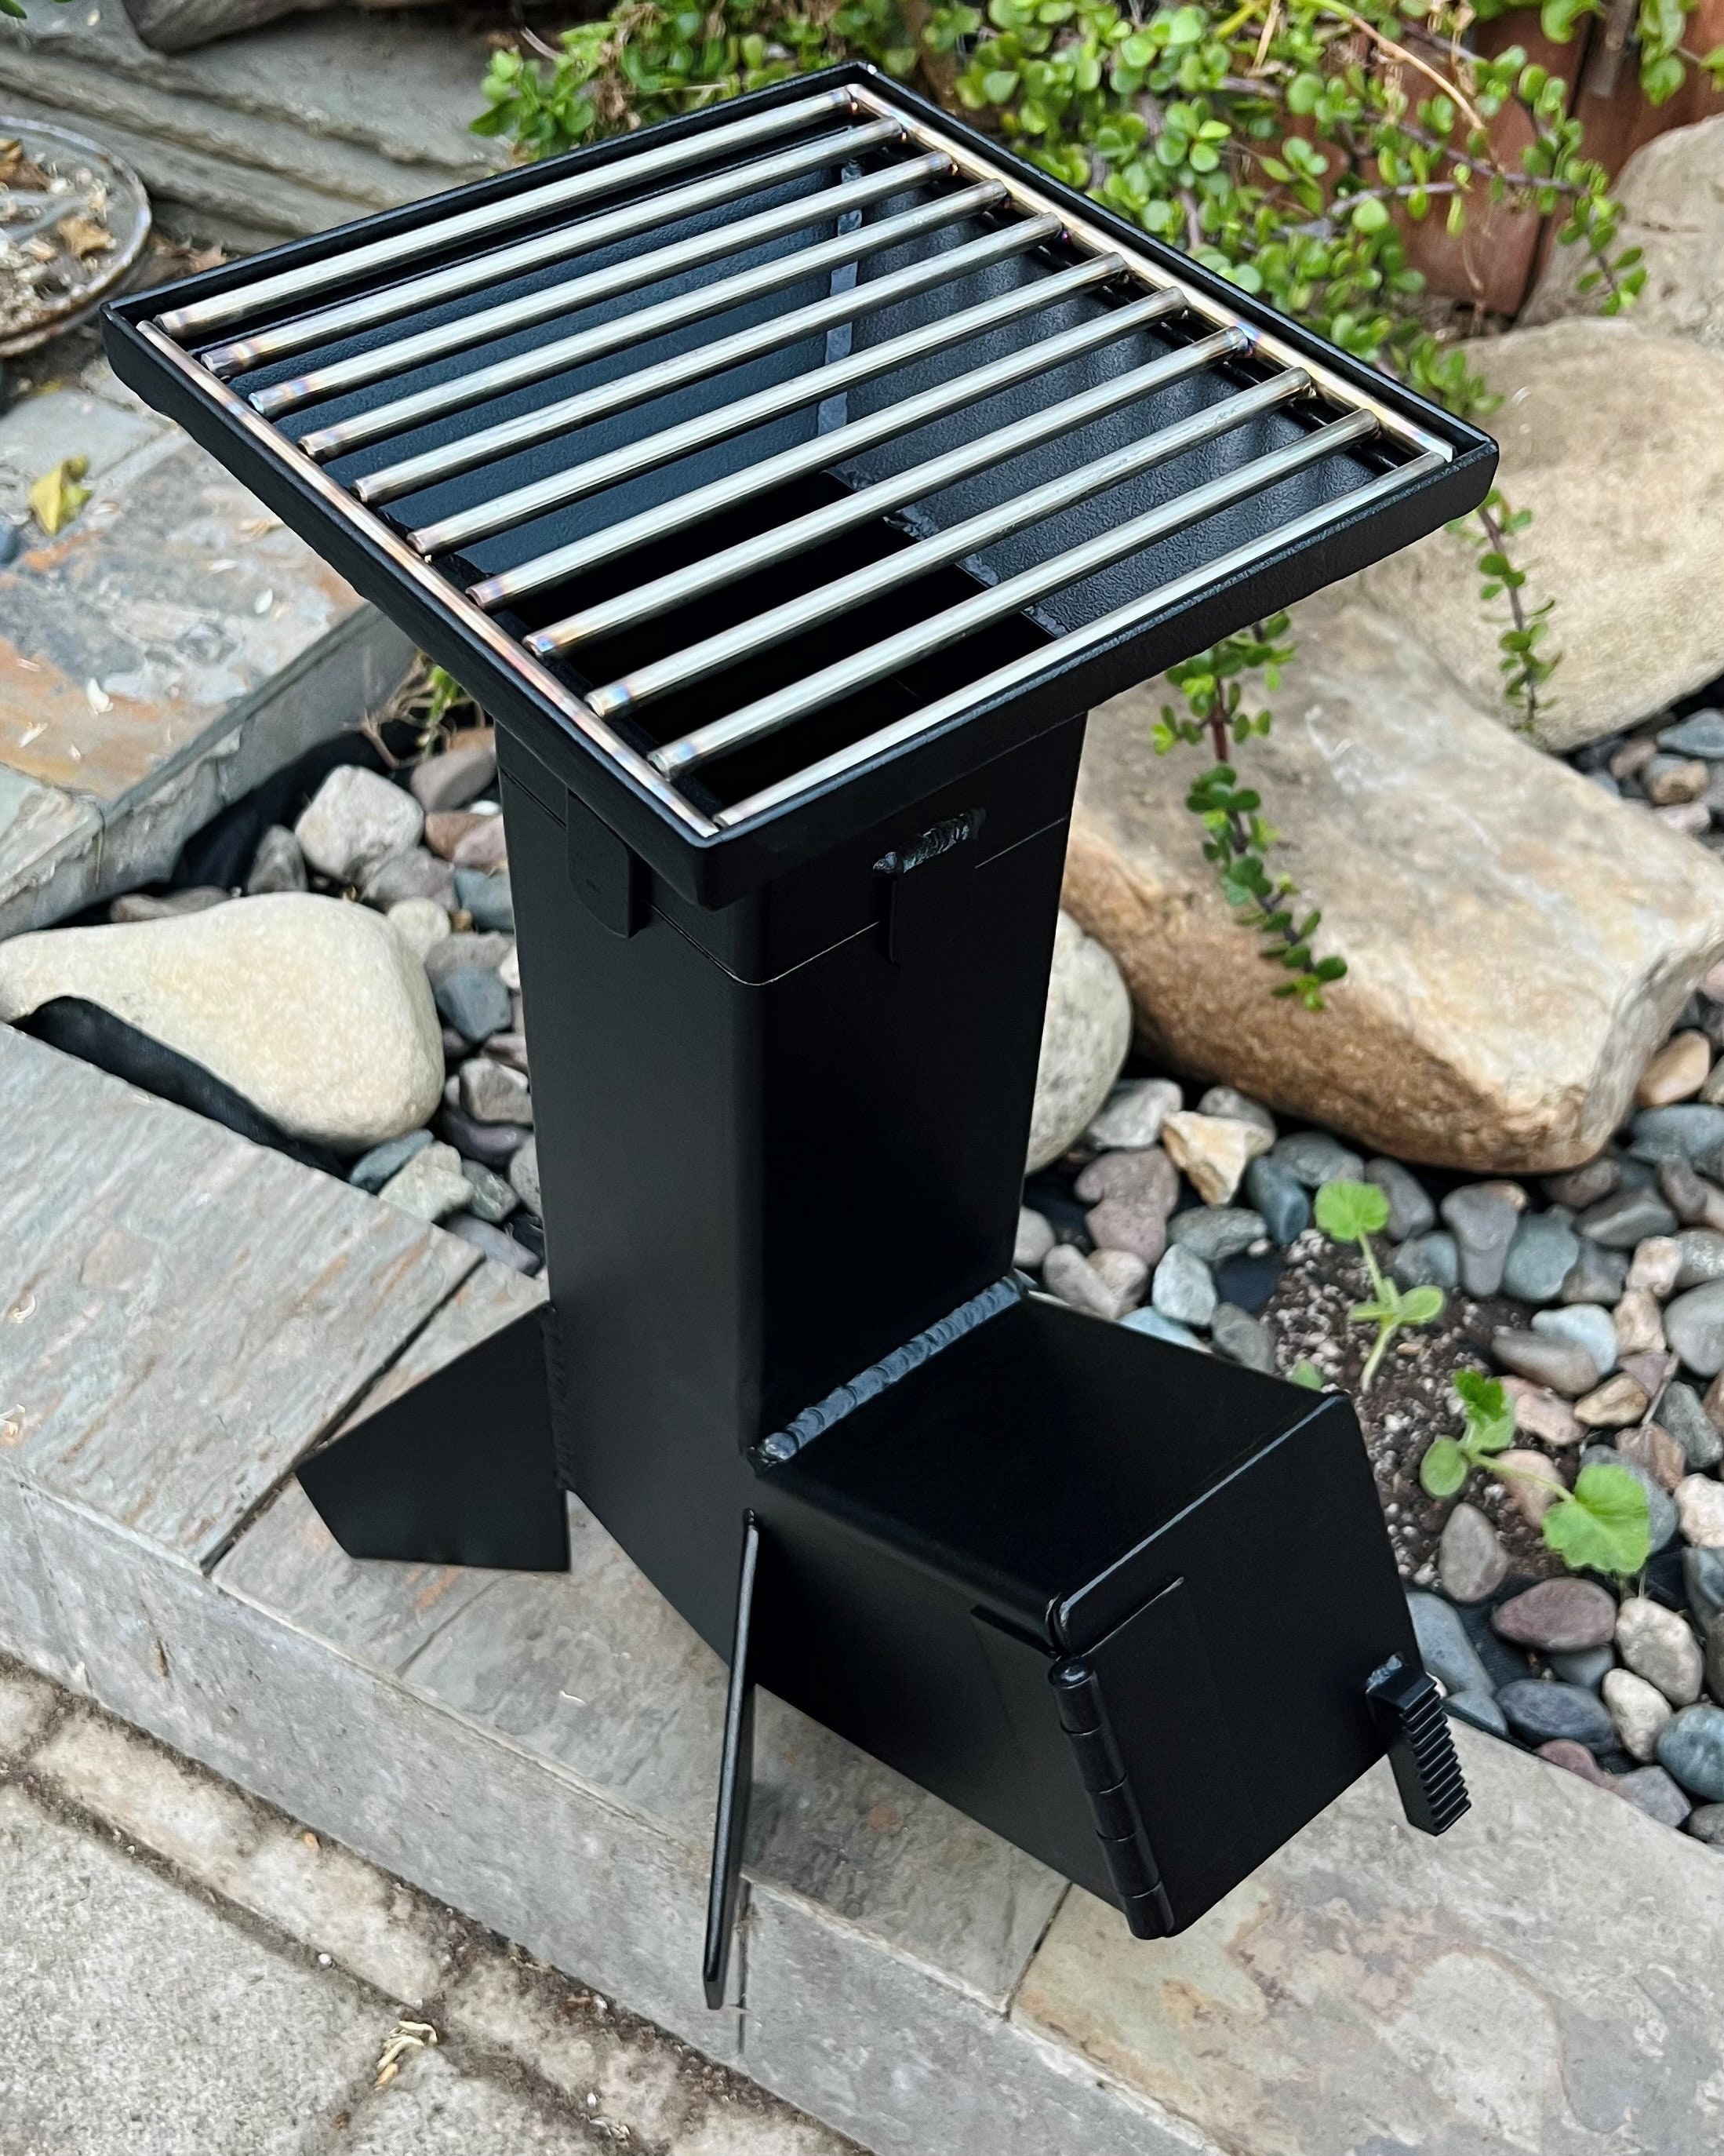 Spitfire BBQ Grill Set for Patrol Rocket Stove, Grill with cast Iron Rack,  Unique Barbecue Grill Set, Ultimate Outdoor Camping Backpacking Cooking